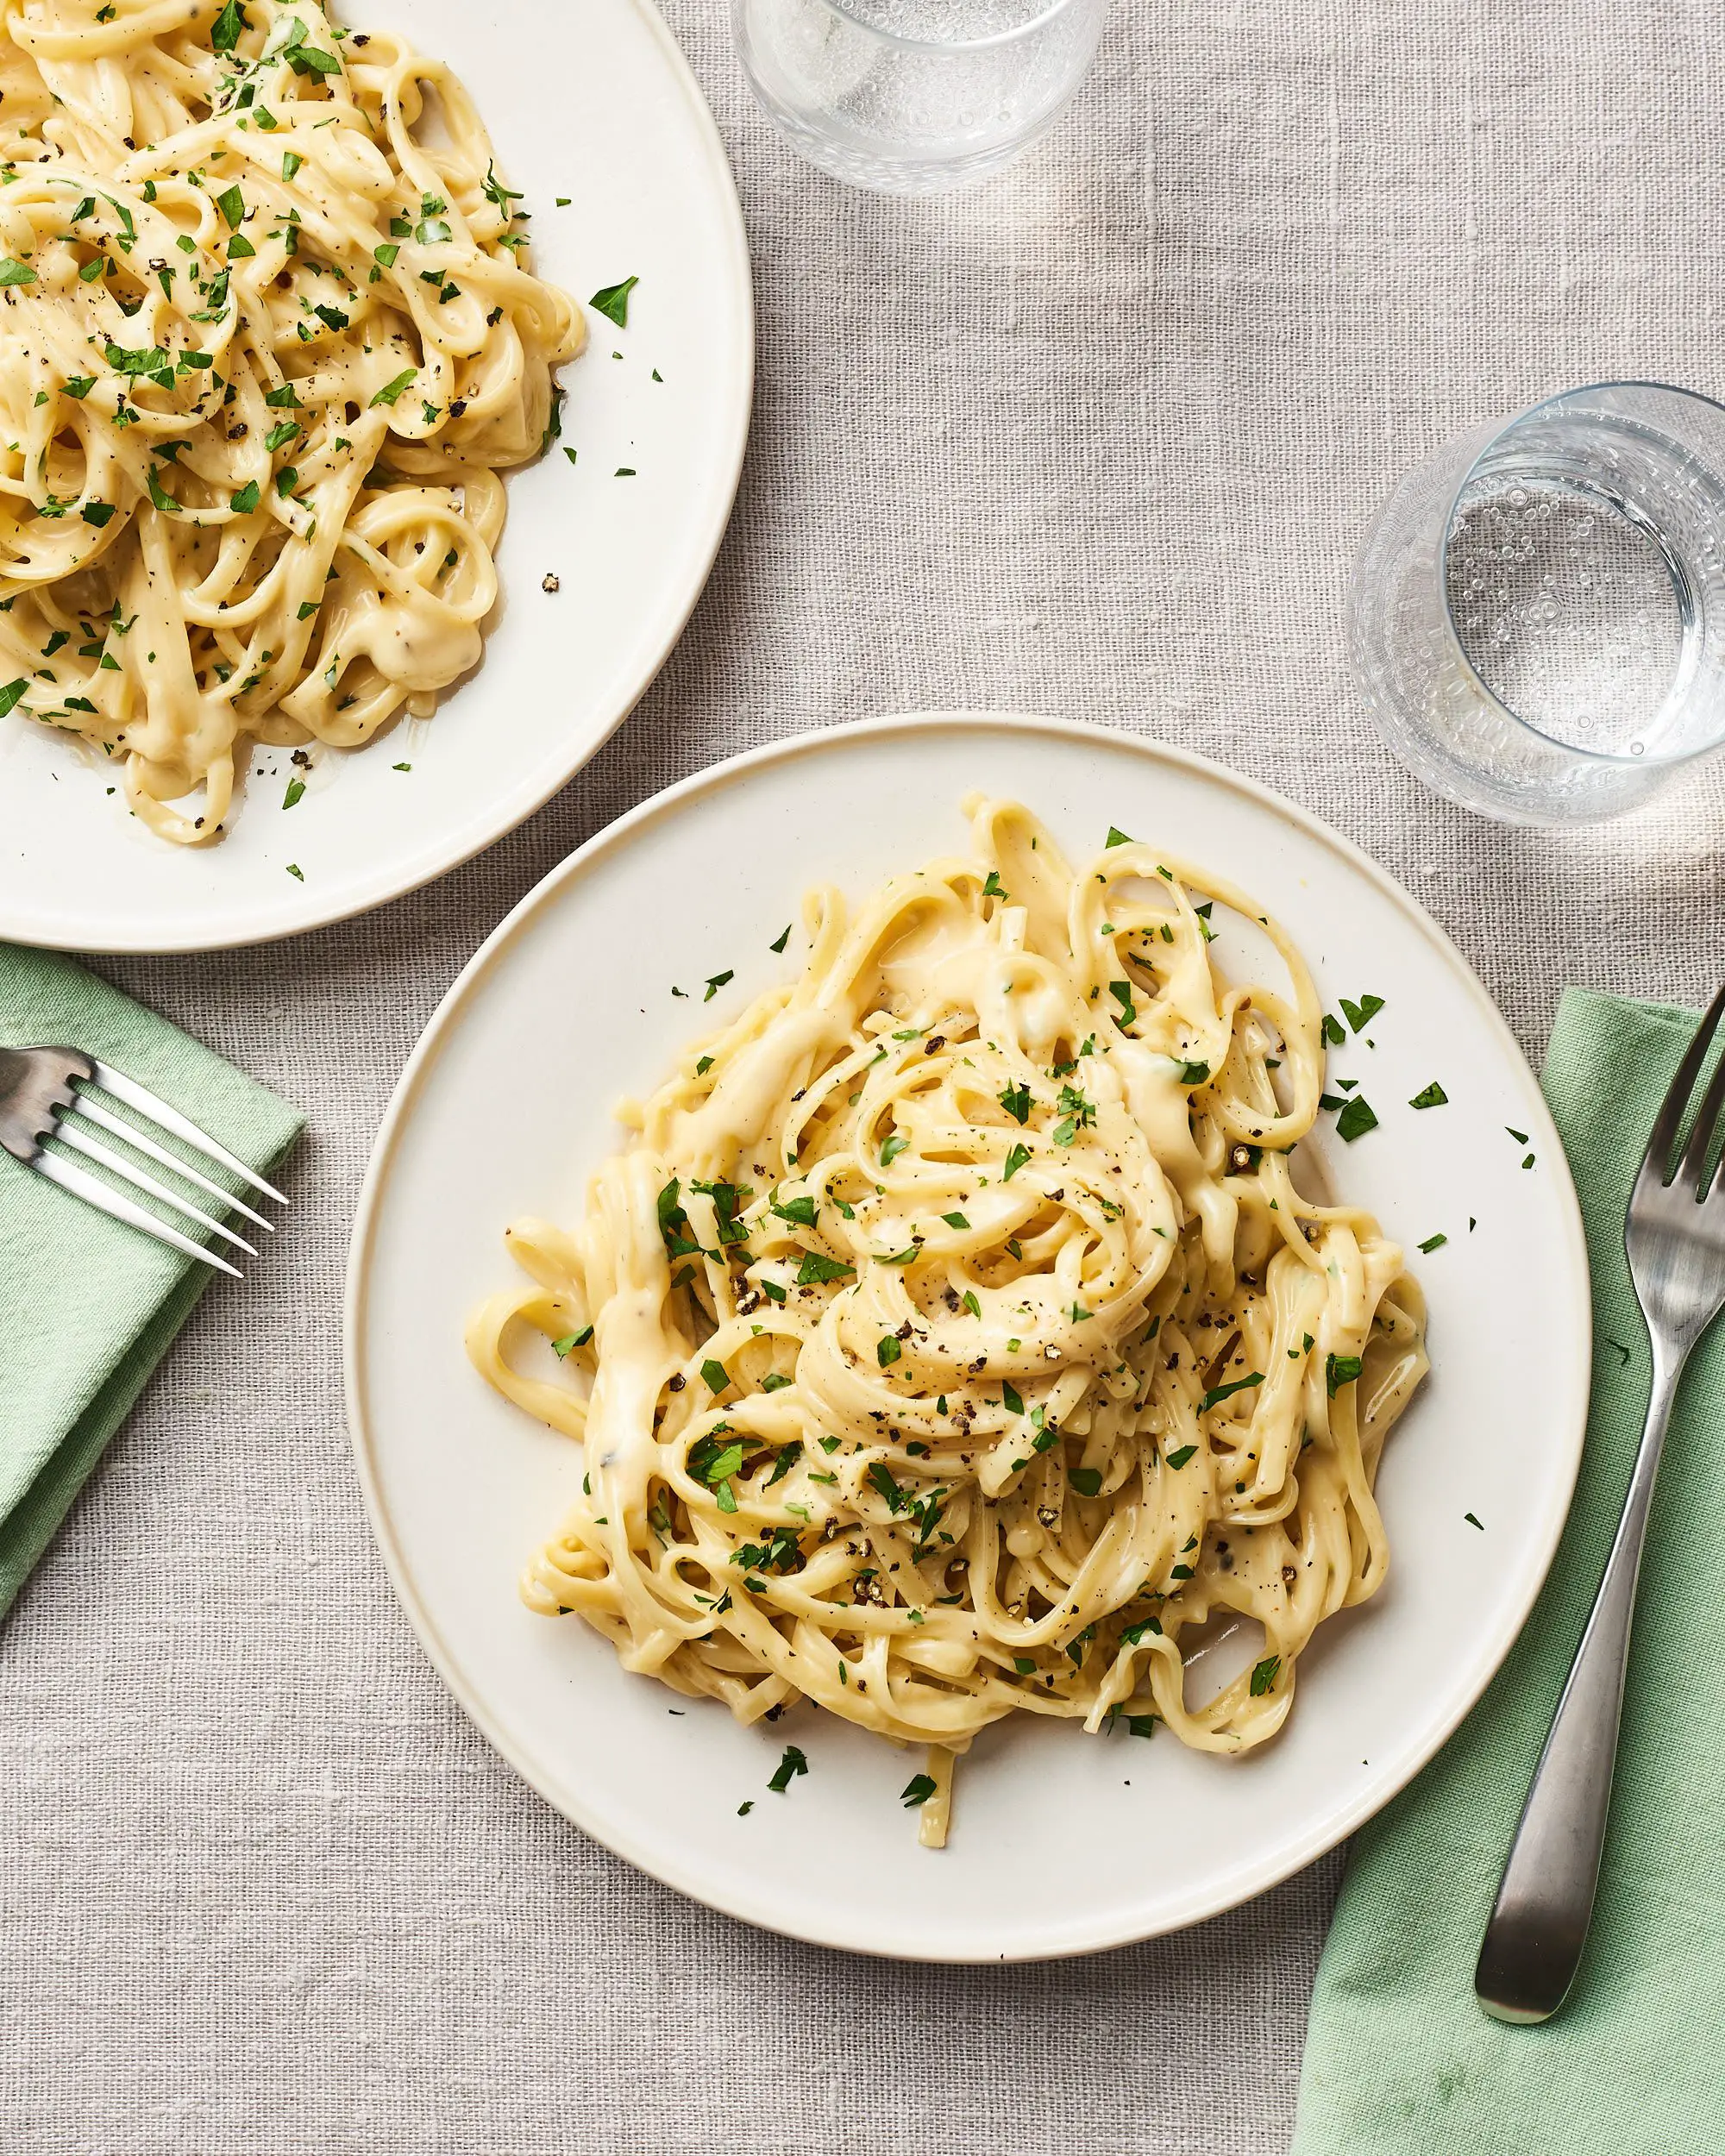 How To Make the Best, Easiest Homemade Alfredo Sauce